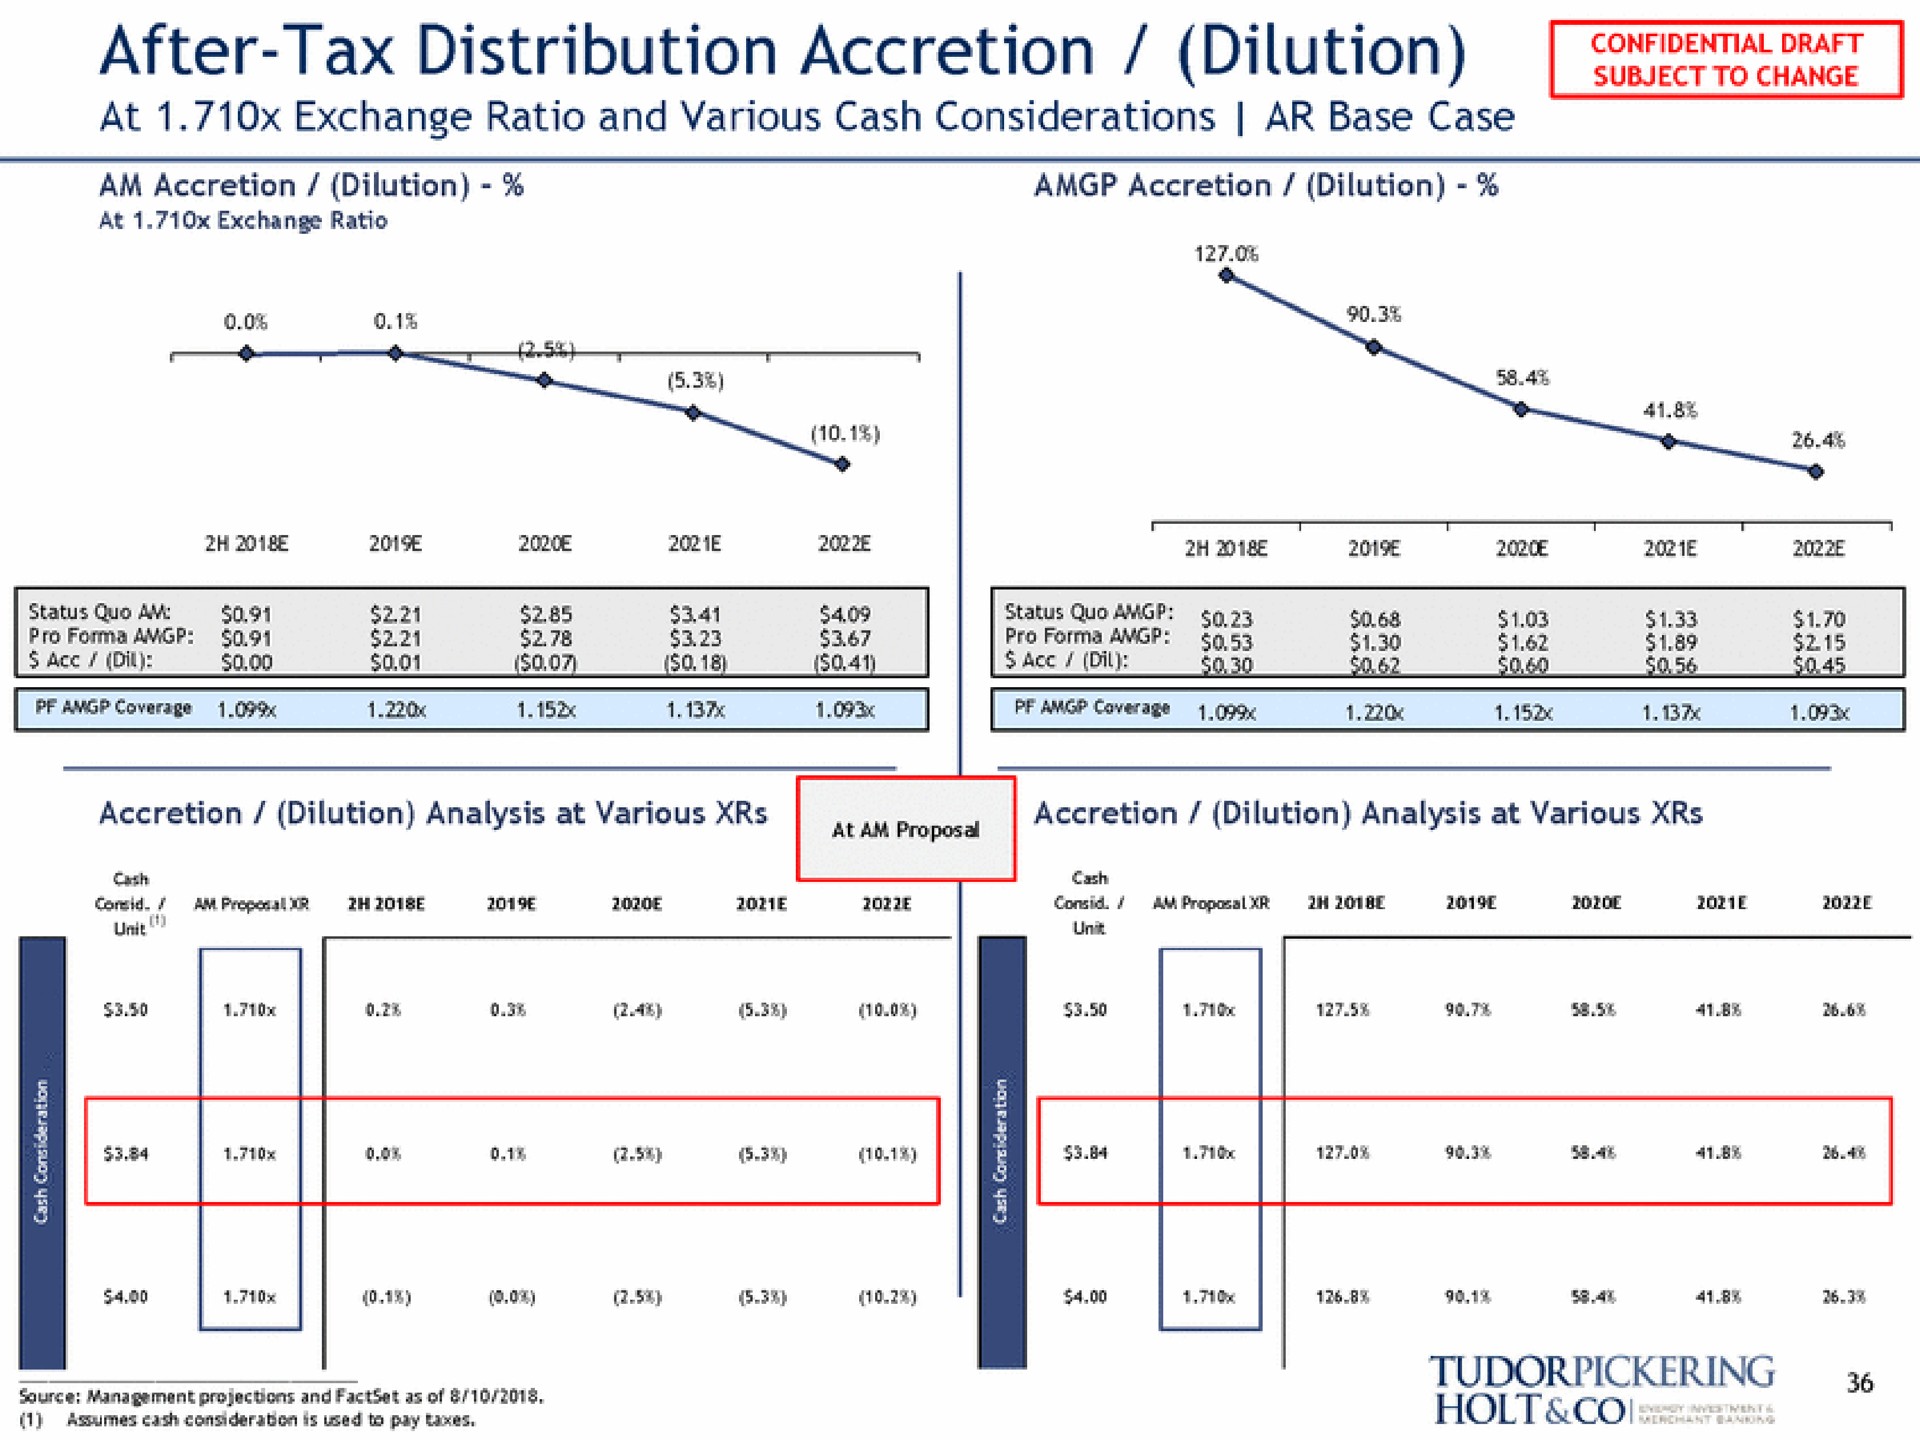 after tax distribution accretion dilution at exchange ratio and various cash considerations base case | Tudor, Pickering, Holt & Co